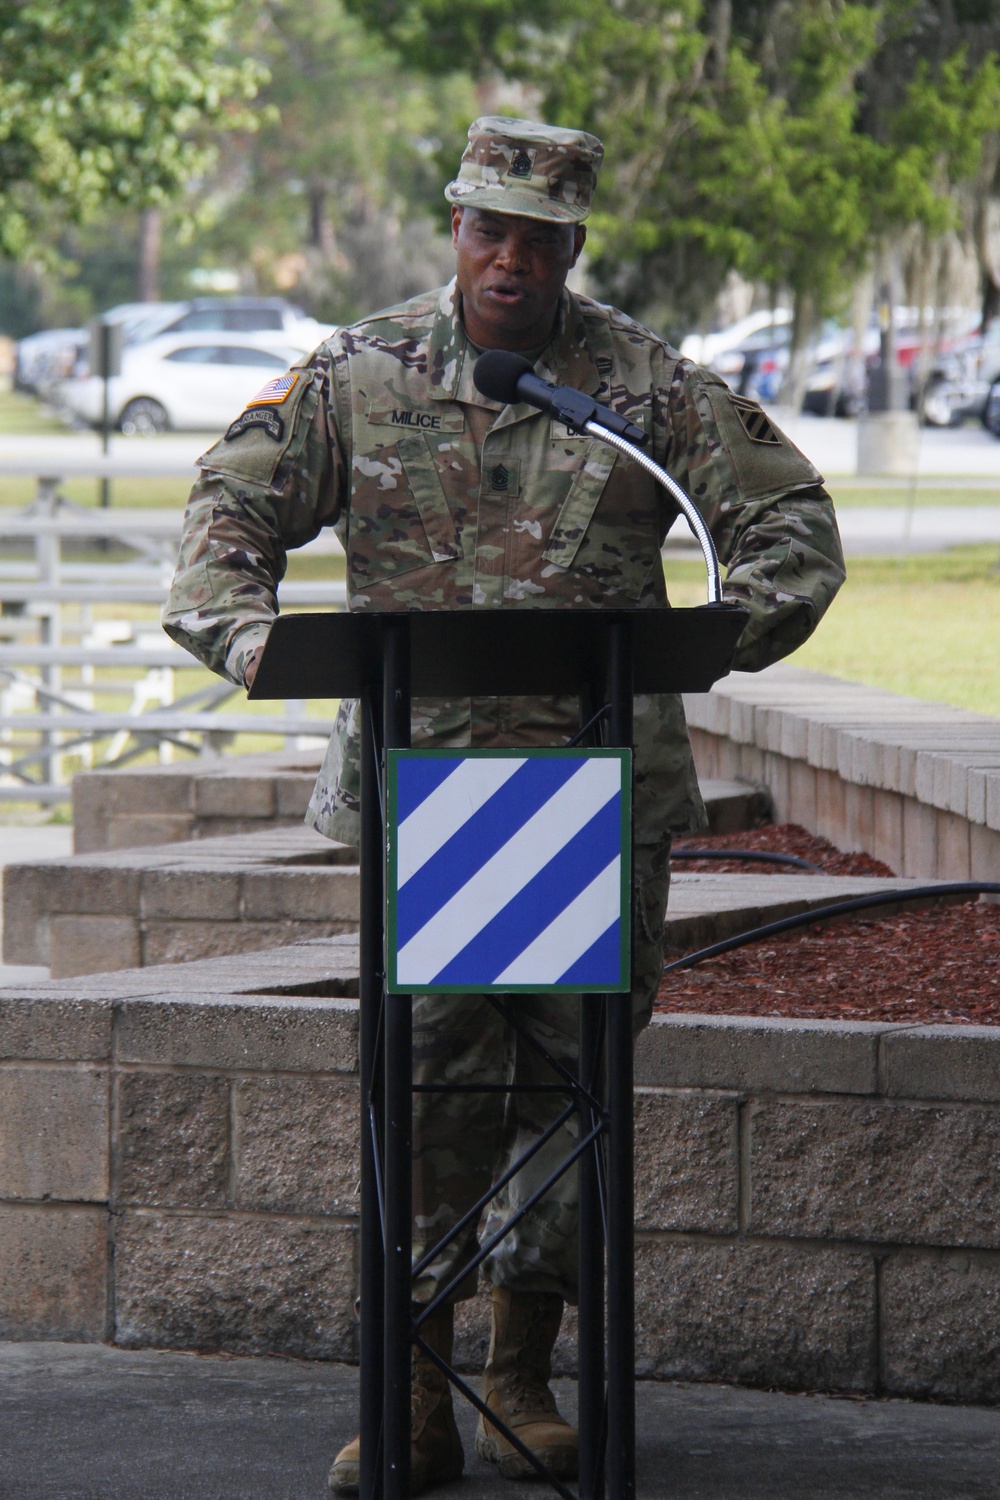 “Legion” Battalion conducts change of responsibility ceremony, Abraham to retire with over 30 years of service